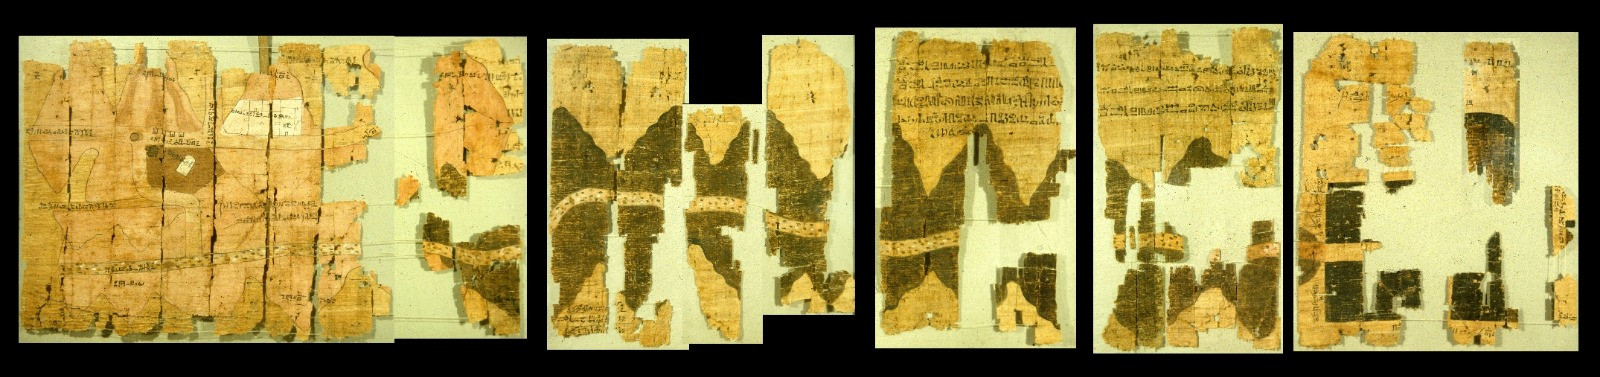 Turin papyrus map from ancient Egypt